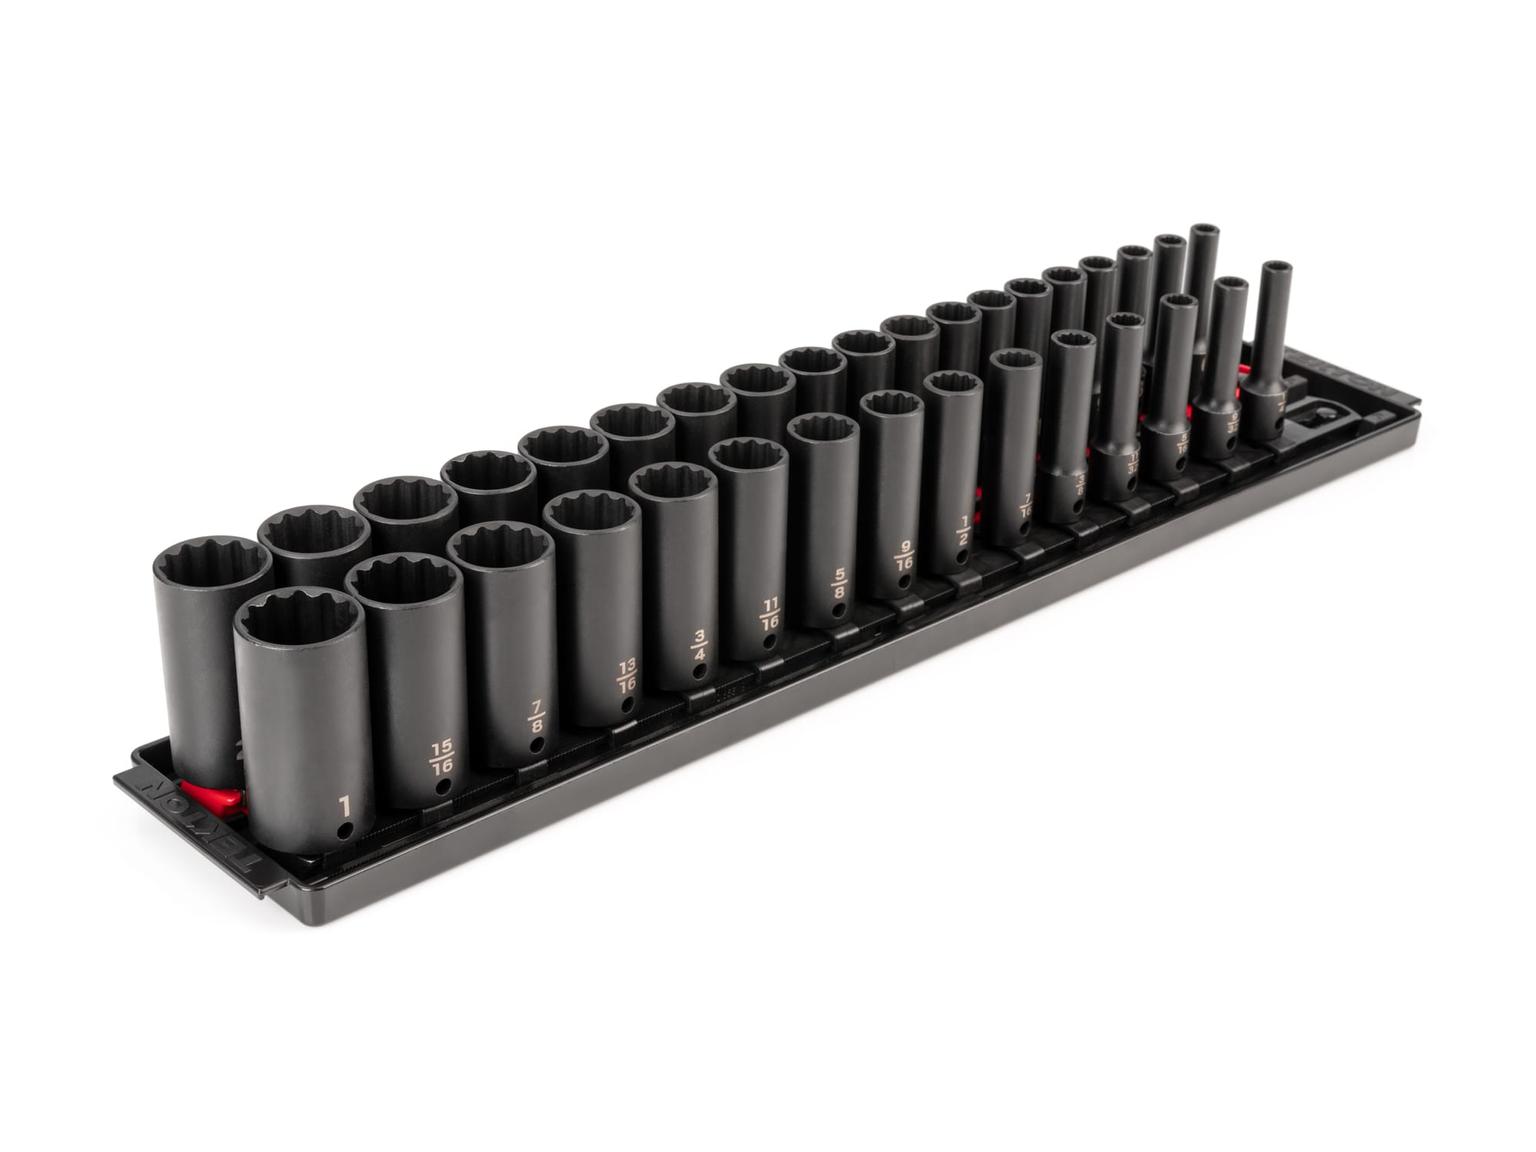 TEKTON SID91207-T 3/8 Inch Drive Deep 12-Point Impact Socket Set, 34-Piece (1/4-1 in., 6-24 mm) with Rails